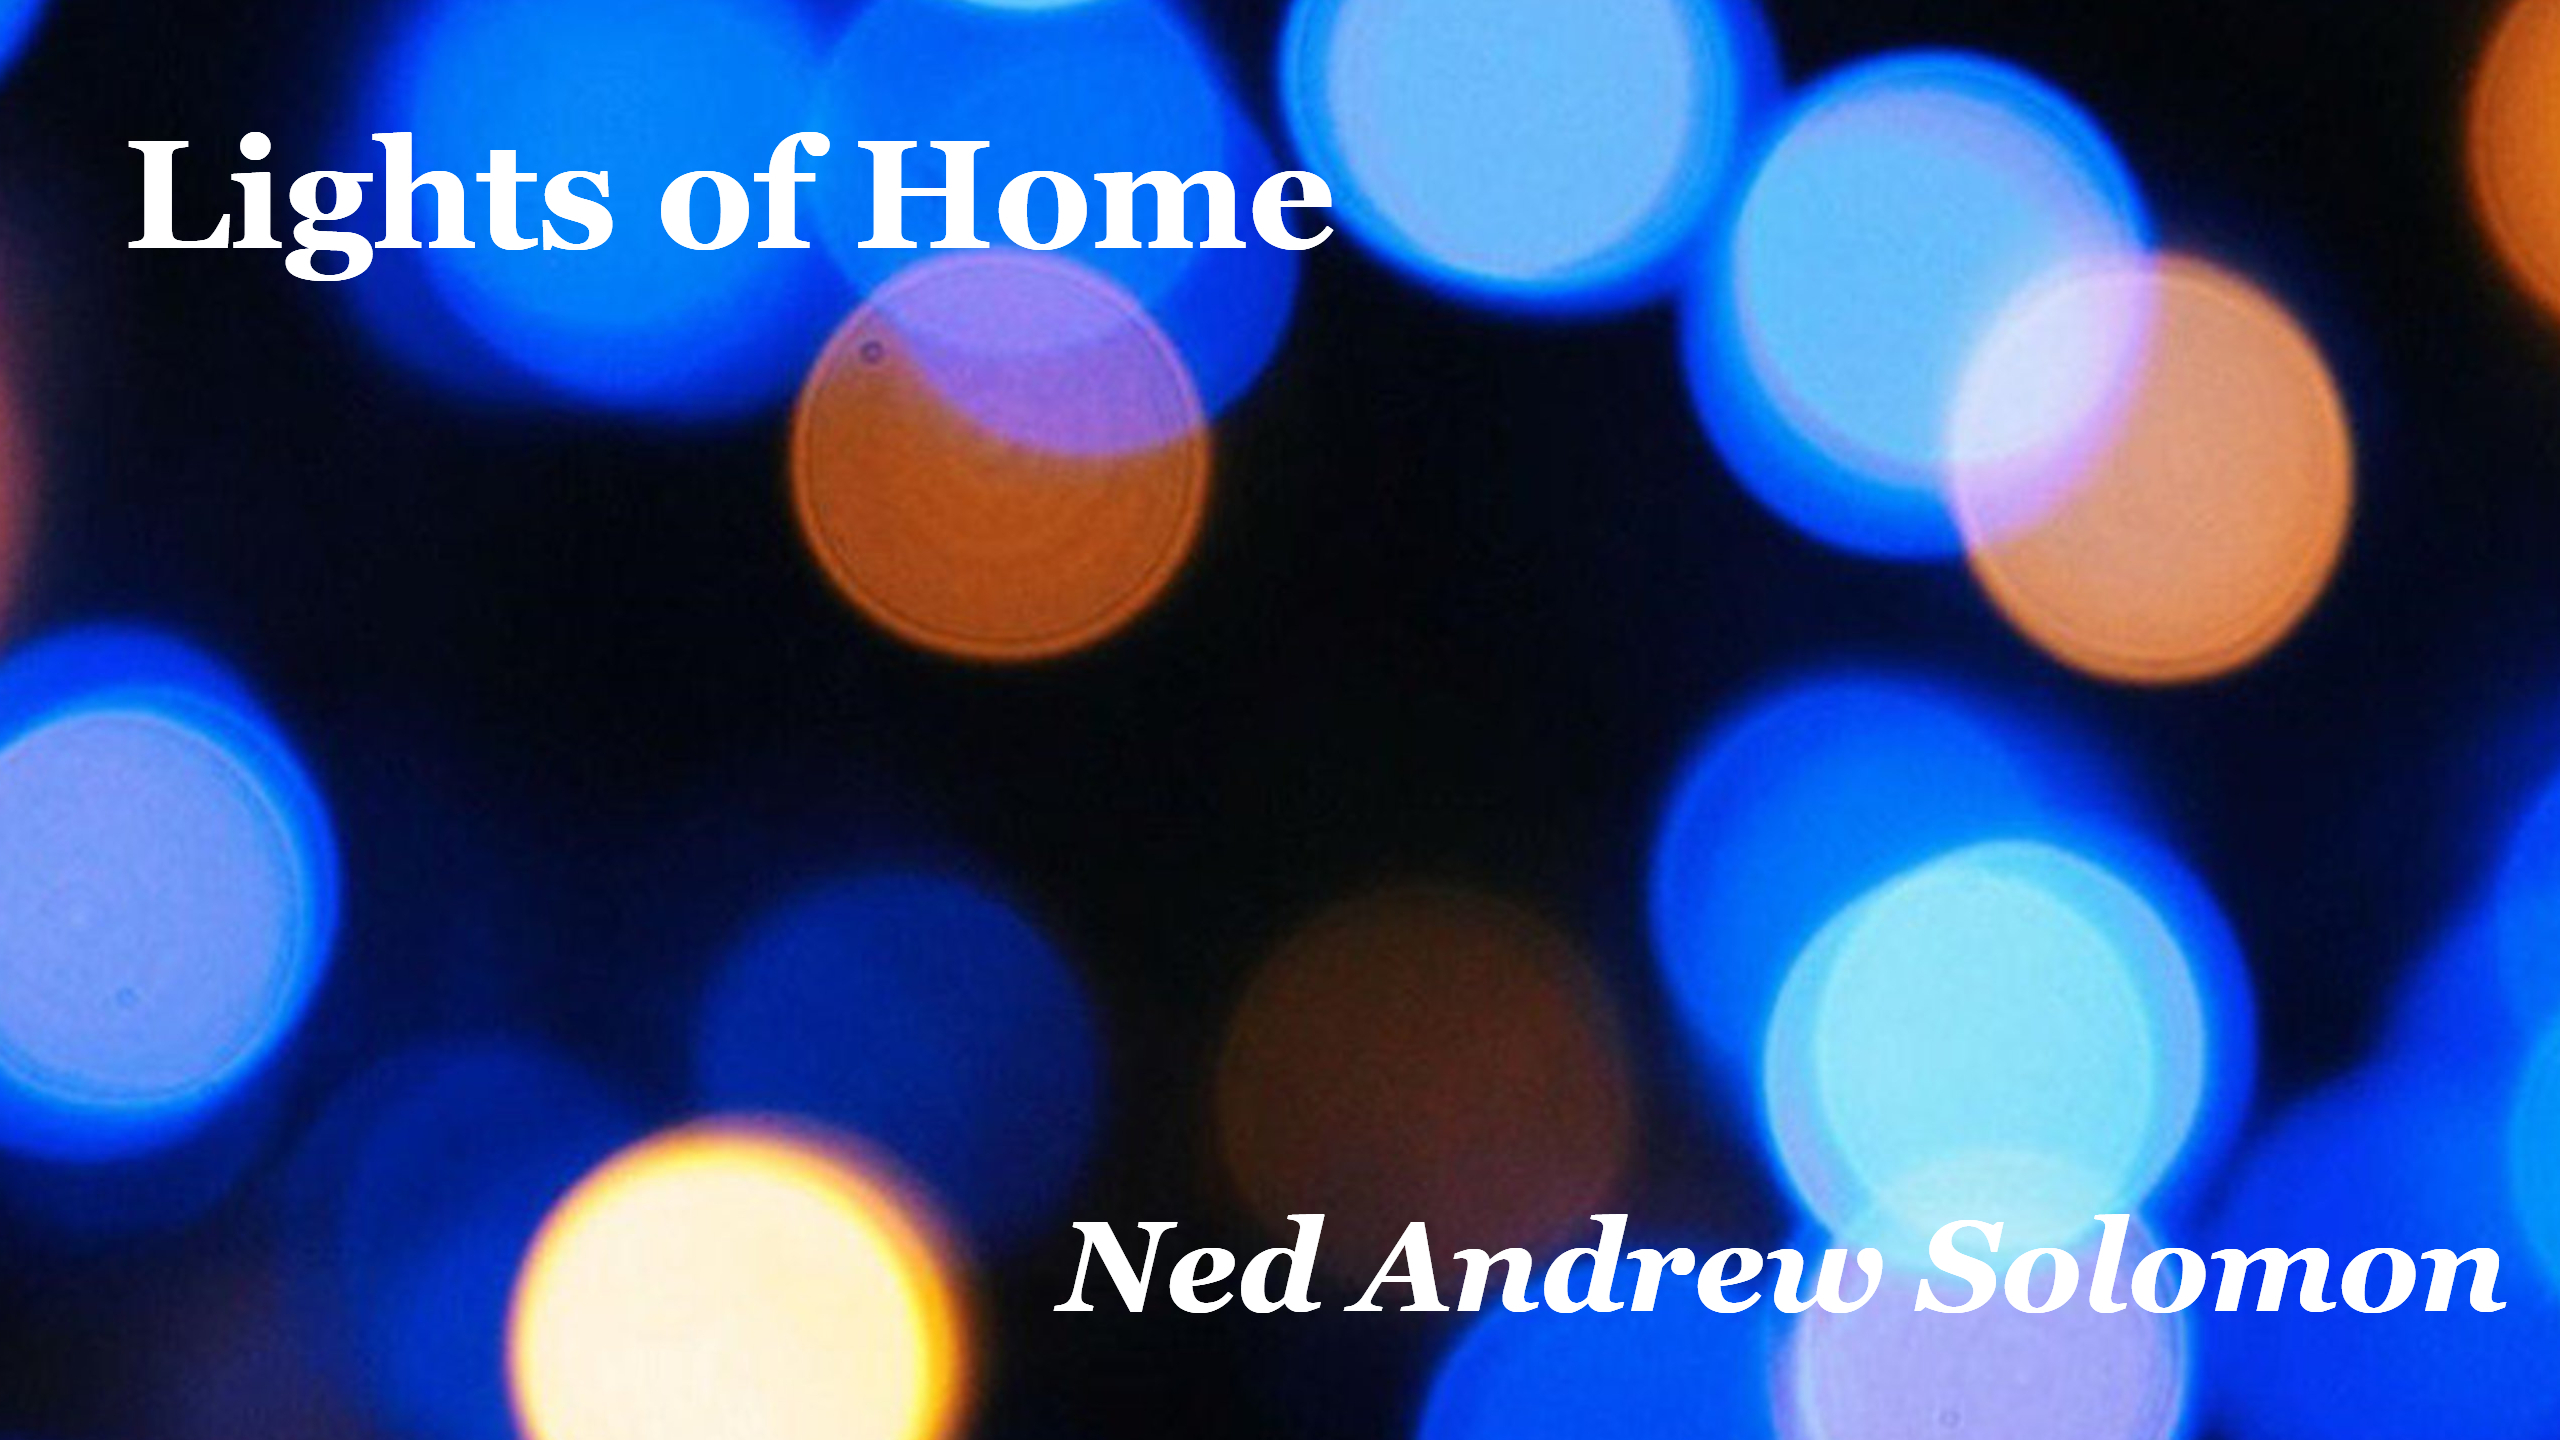 Lights of Home by Ned Andrew Solomon over a blurred image of colored lights on a black background